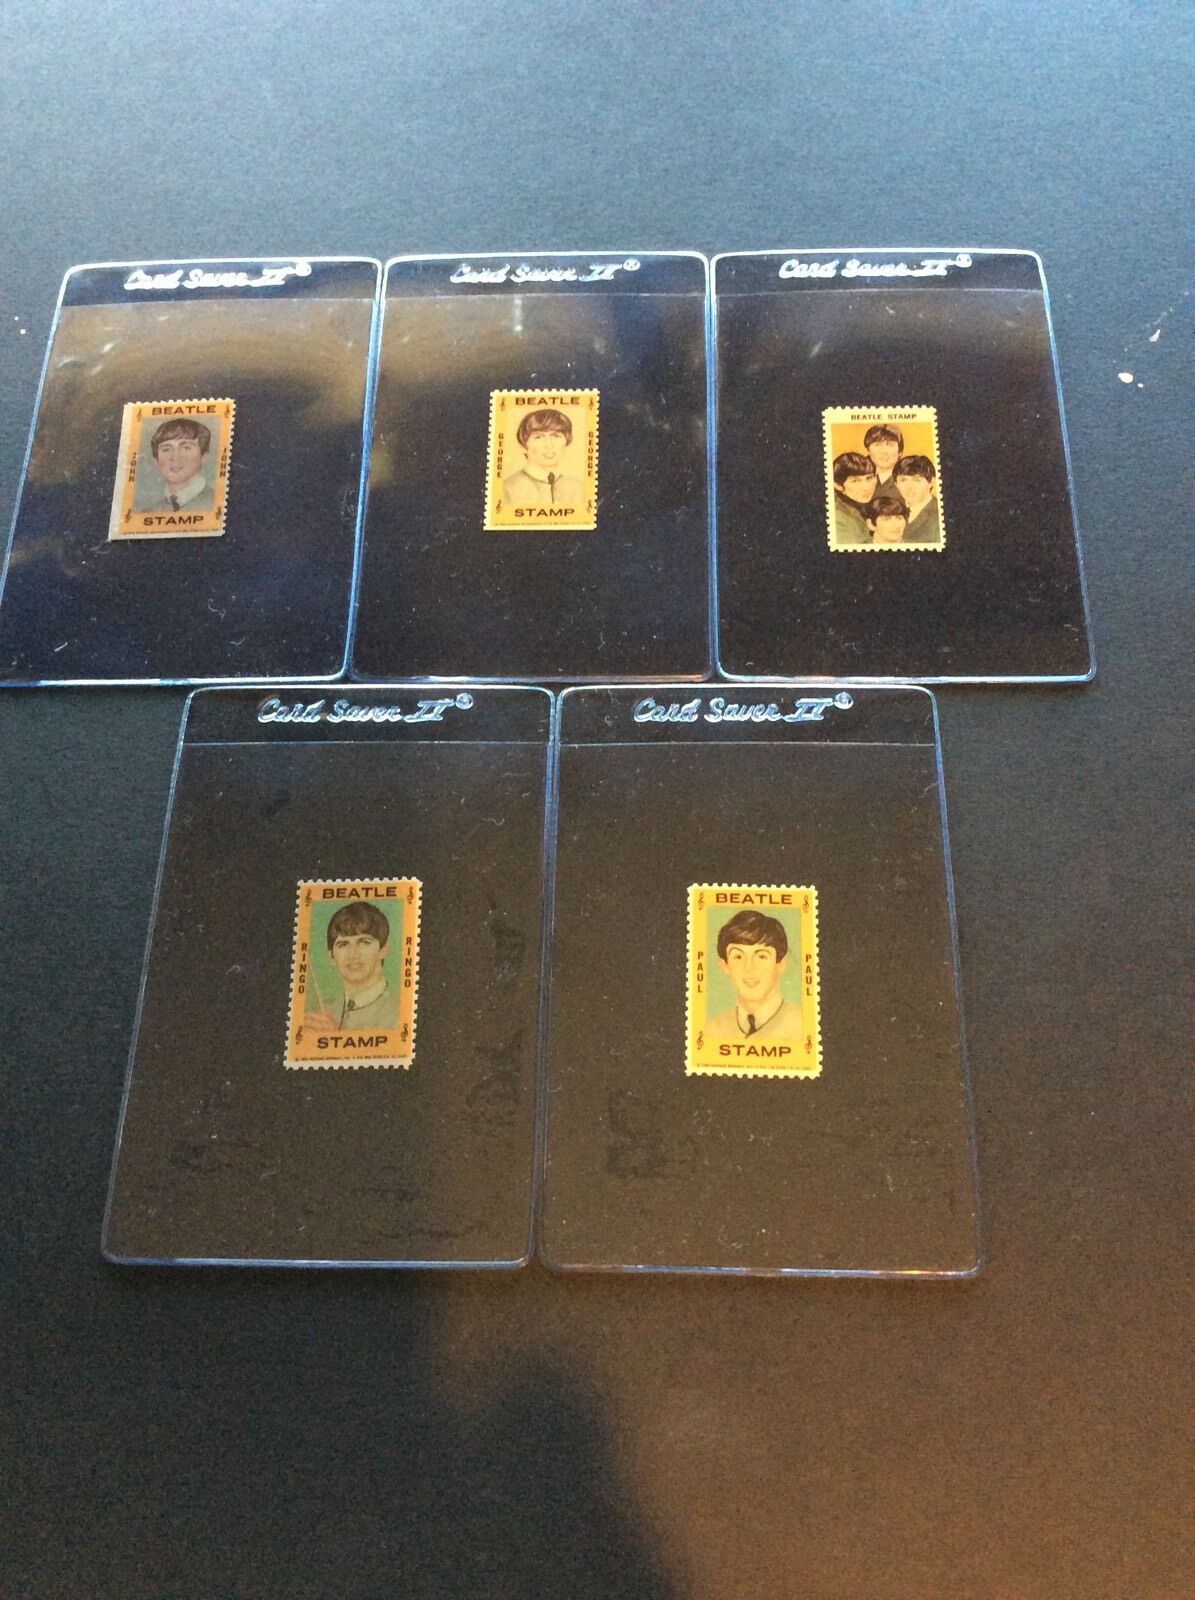 Beatles 1964 Hallmark Stamps- Full Set Of 5 Stamps With Plastic Holders Included